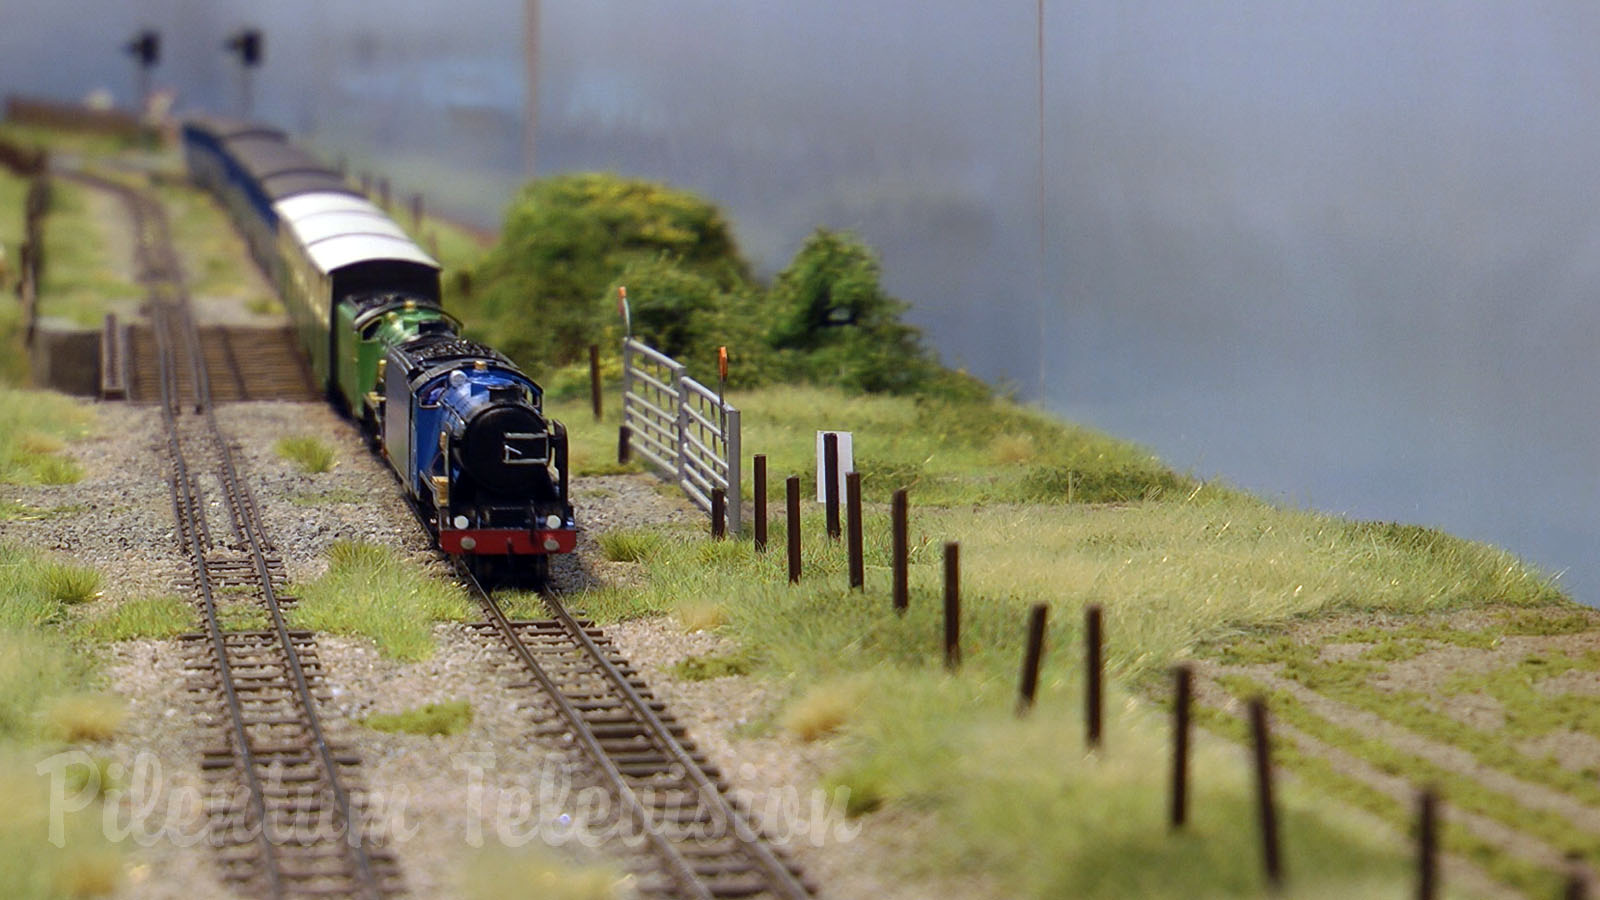 One of a kind model railroad layout: The Romney, Hythe and Dymchurch Railway in Miniature